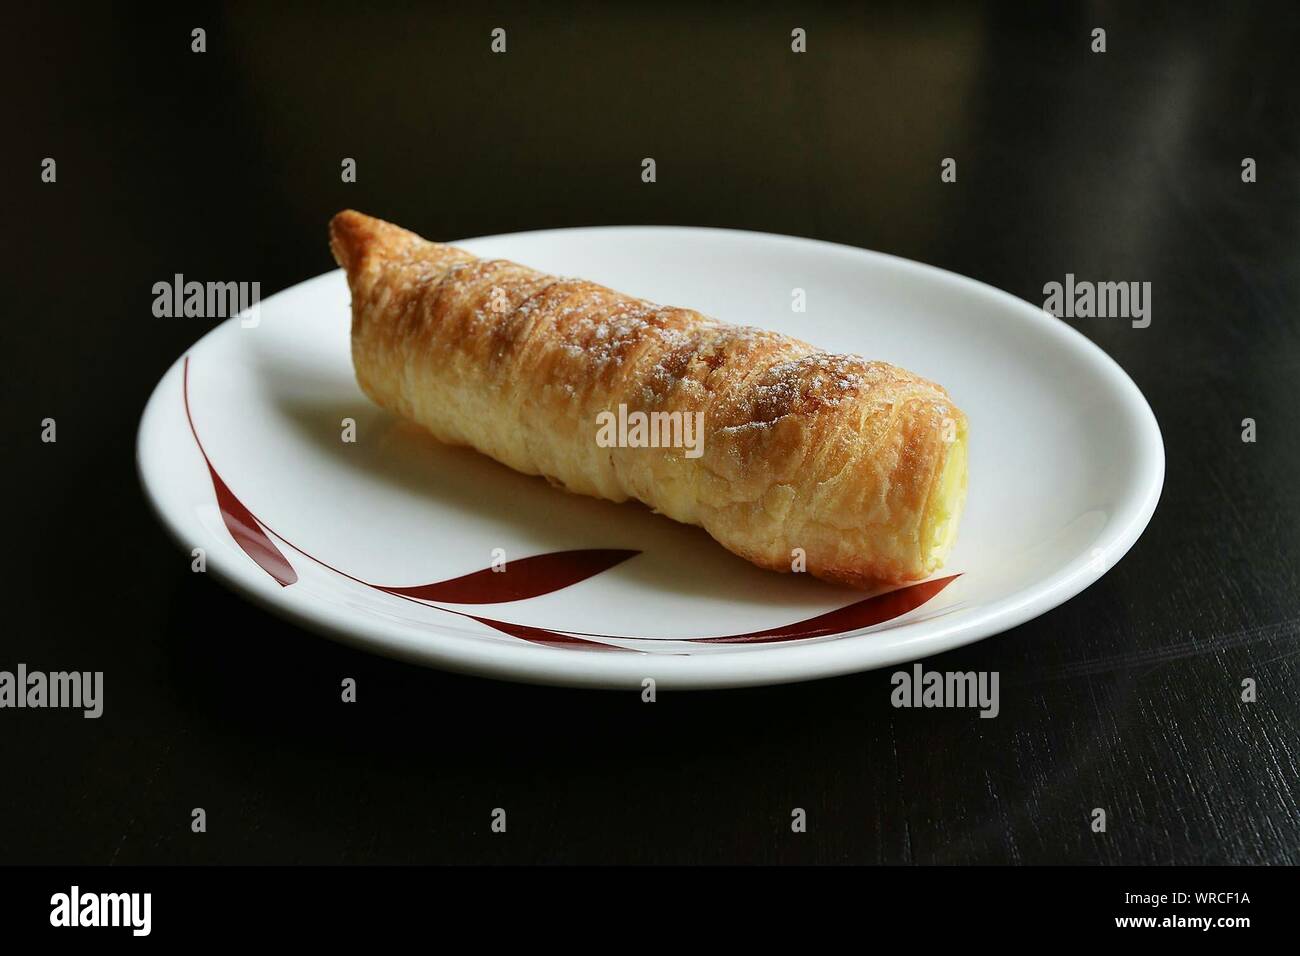 Close-up Of Fresh Baked Crunchy Bread Served In Plate On Table Stock Photo